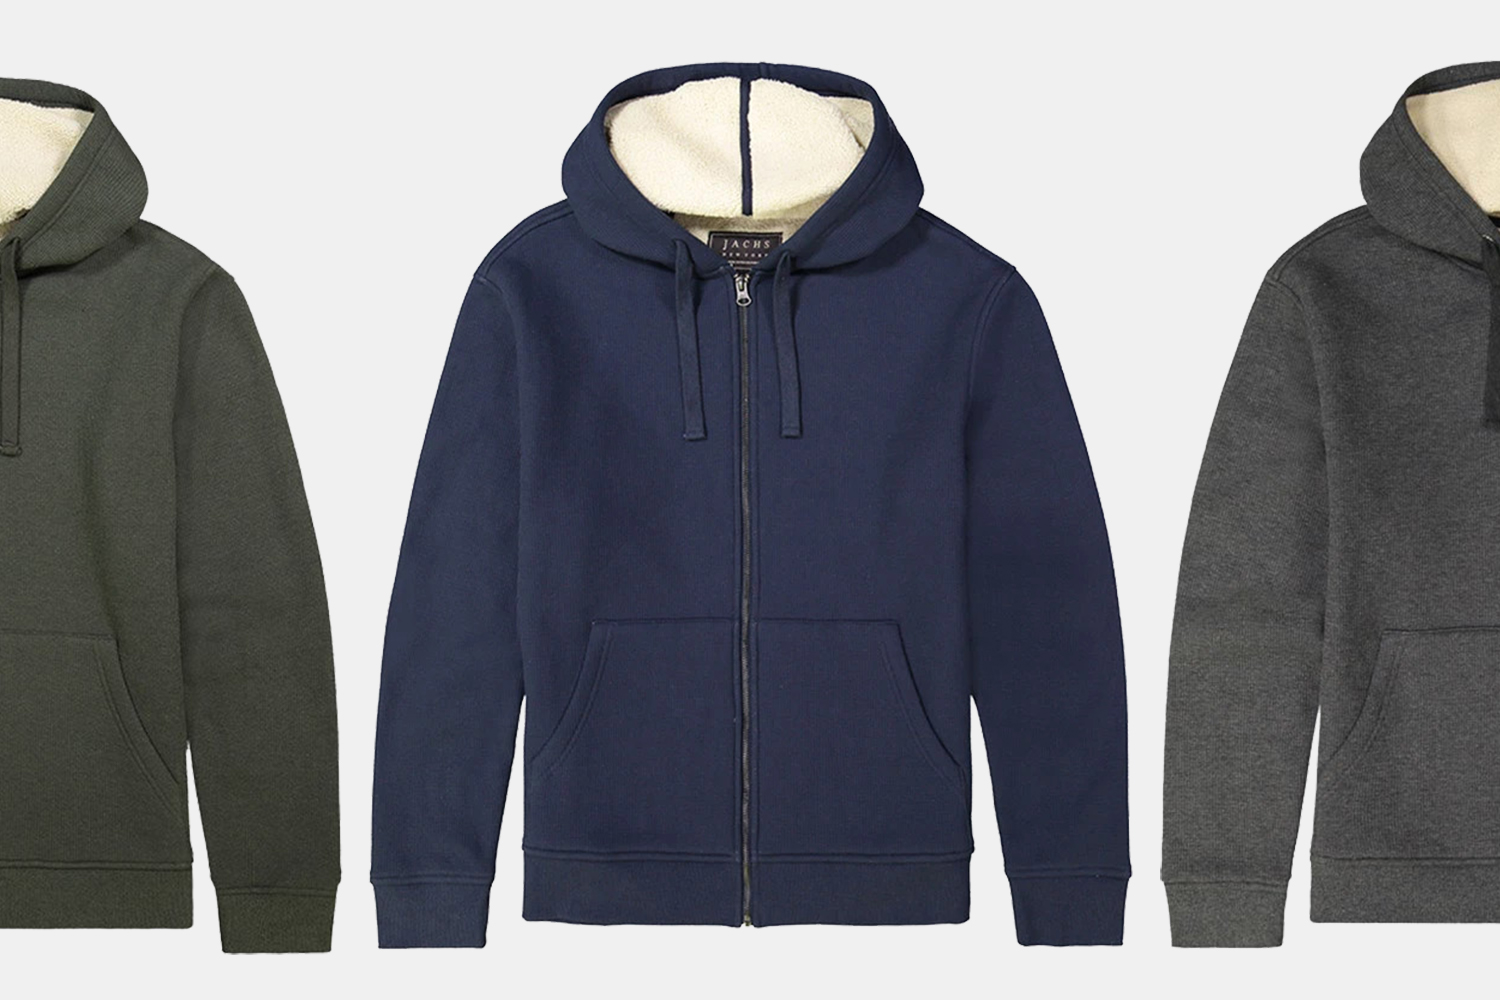 Sherpa-Lined Hoodies for $20 at Jachs 